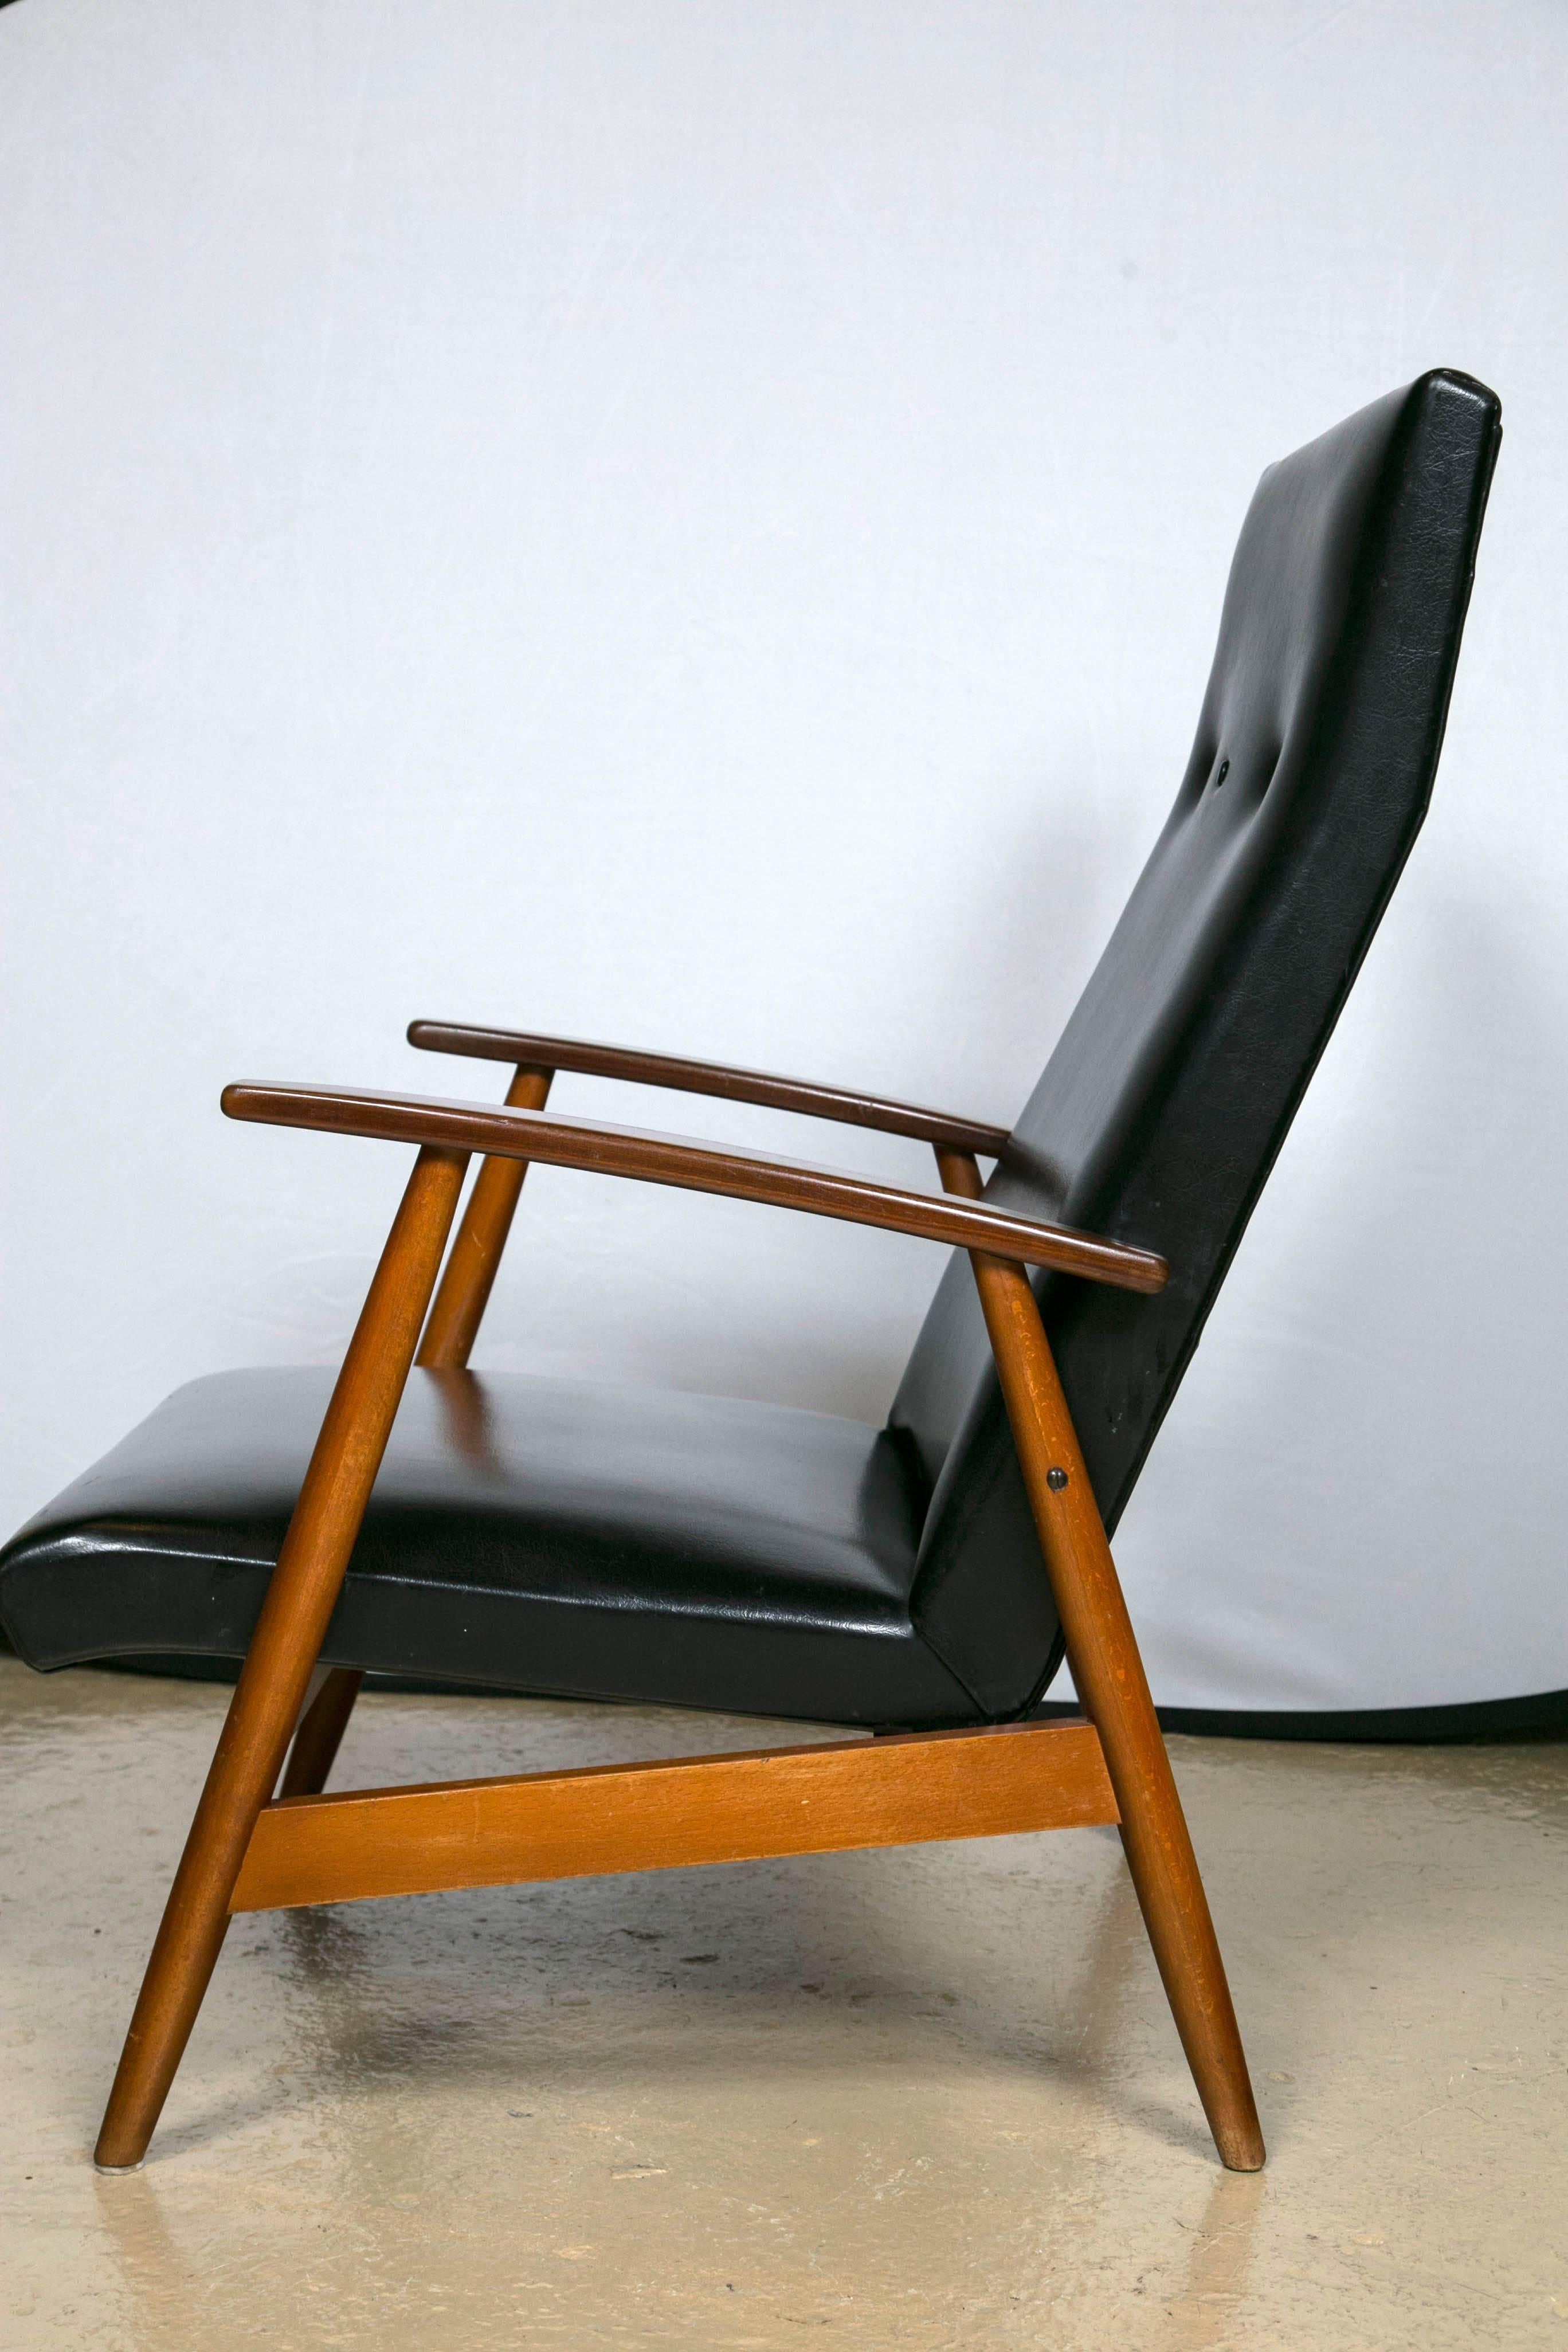 Pair of Mid Century Modern Scandinavian Teak and Black Lounge Chairs In Good Condition For Sale In Stamford, CT